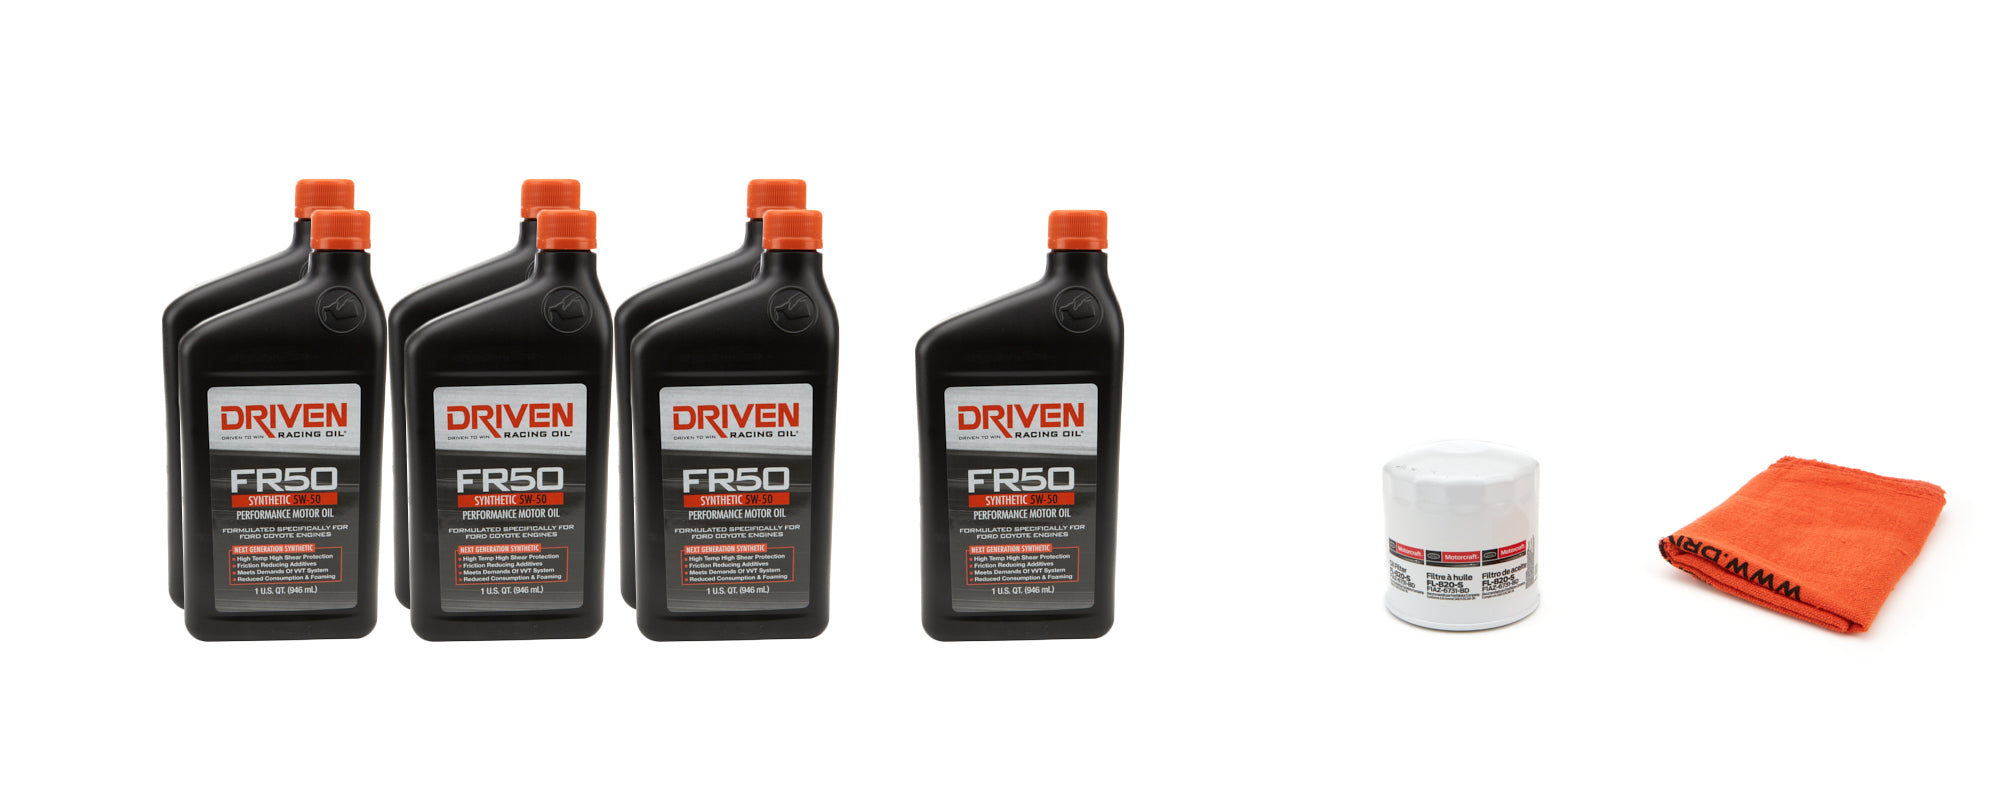 Driven Racing Oil 5w50 Oil Change Kit 07- 12 Mustang GT500 5.4L Oils, Fluids and Additives Motor Oil main image